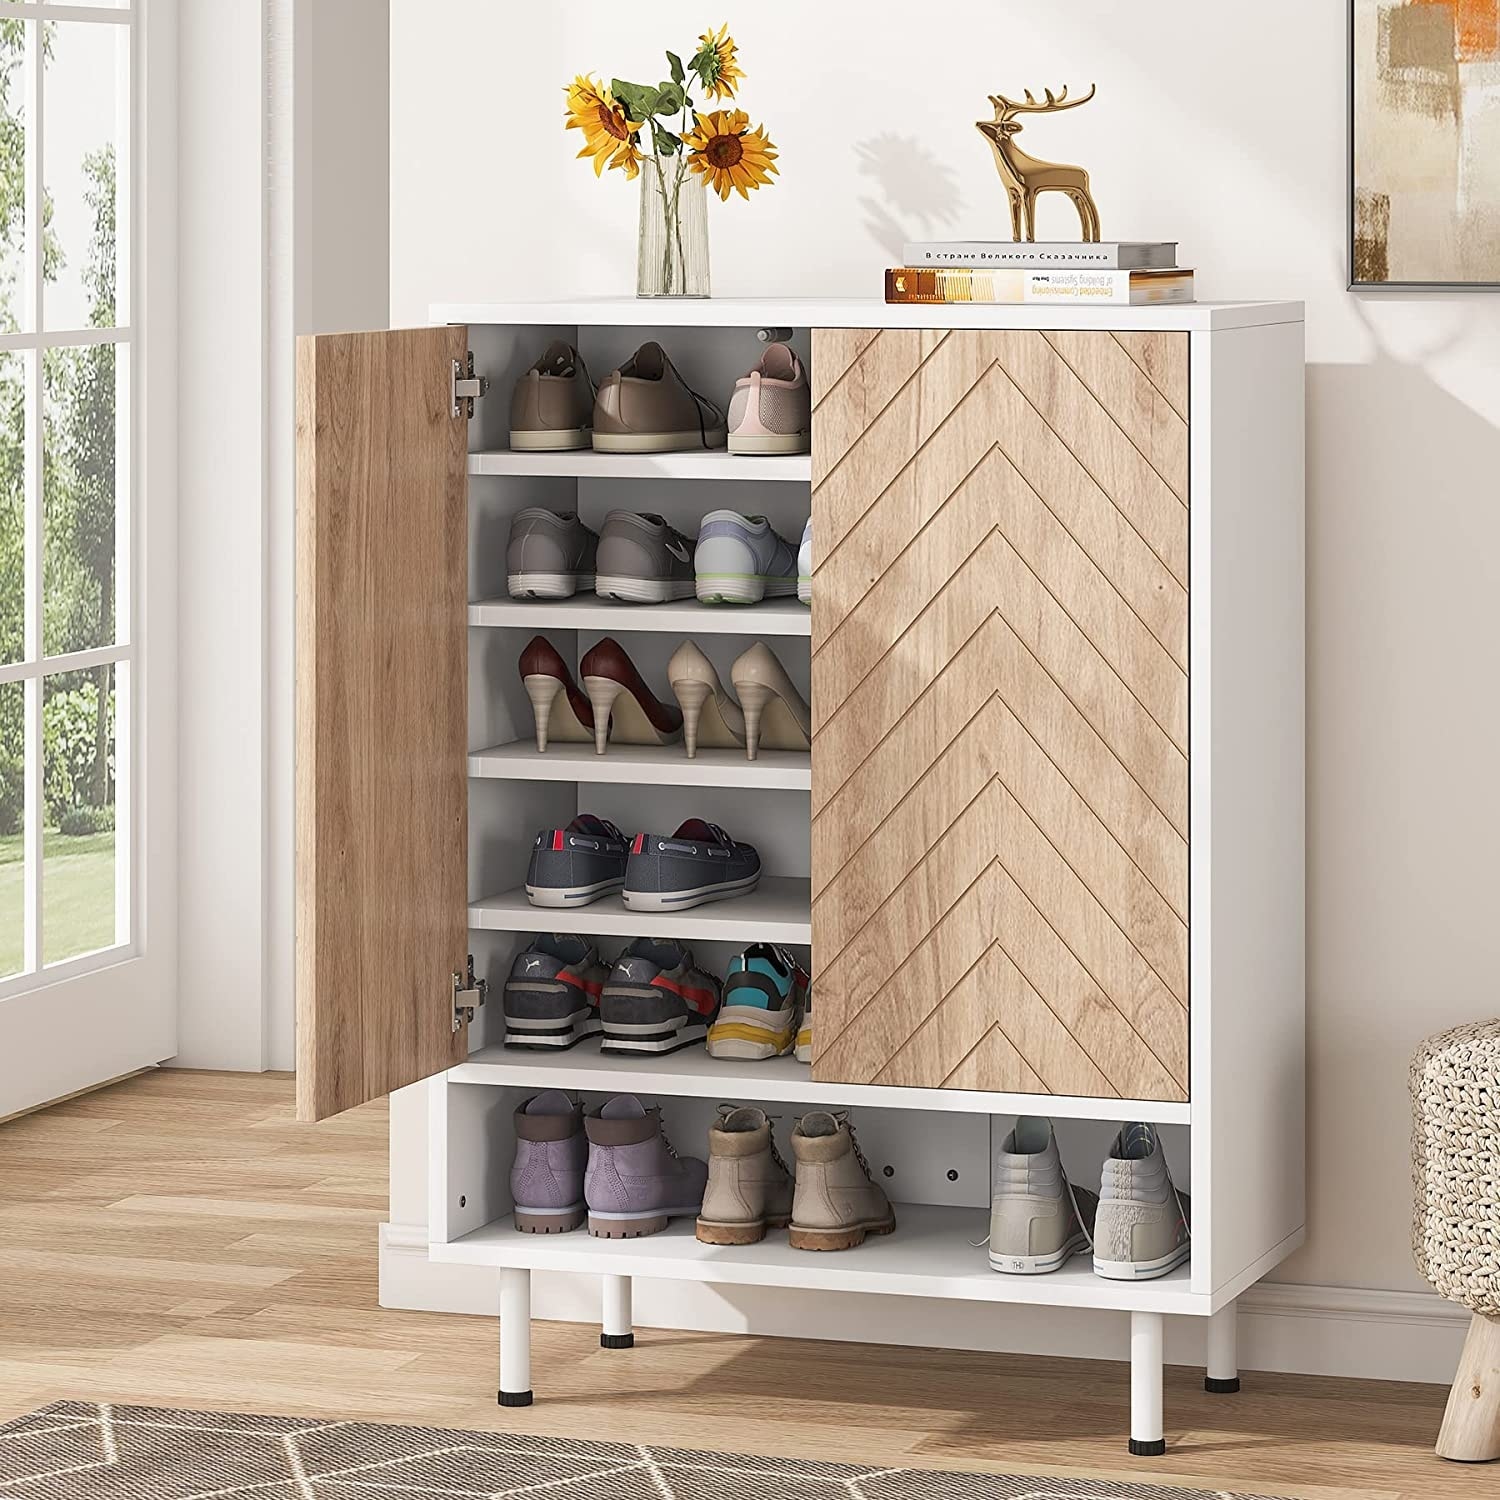 https://ak1.ostkcdn.com/images/products/is/images/direct/124c8f39b4d36834311c3cc0e5b7f8564127d62a/18-Pair-Shoe-Storage-Cabinet-for-Entryway-Shoe-Rack-Organizer.jpg